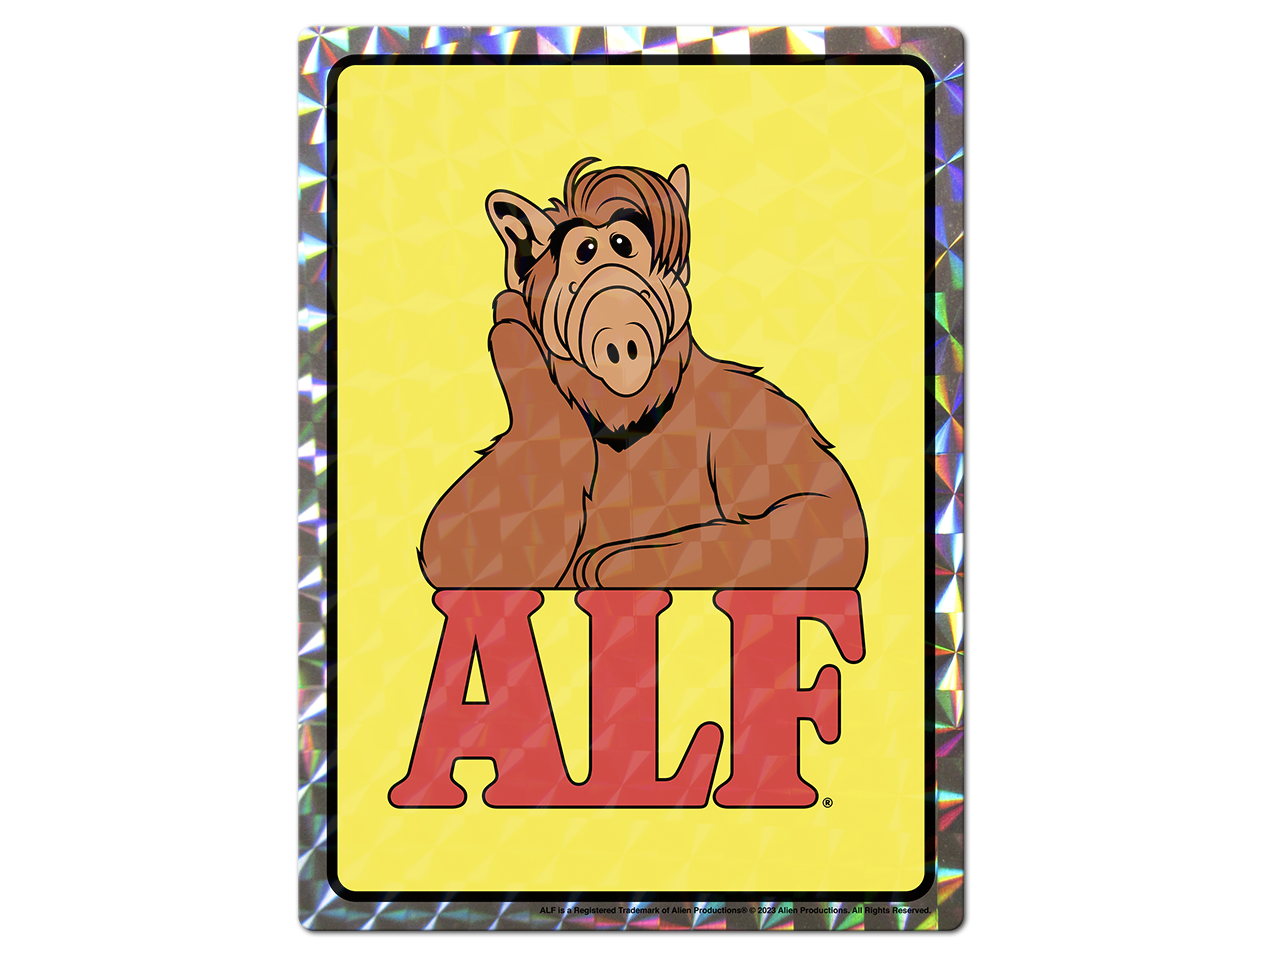 ALF: The Complete Series [Deluxe Edition] + Poster + Prism Sticker + Tabby Vinyl - Shout! Factory